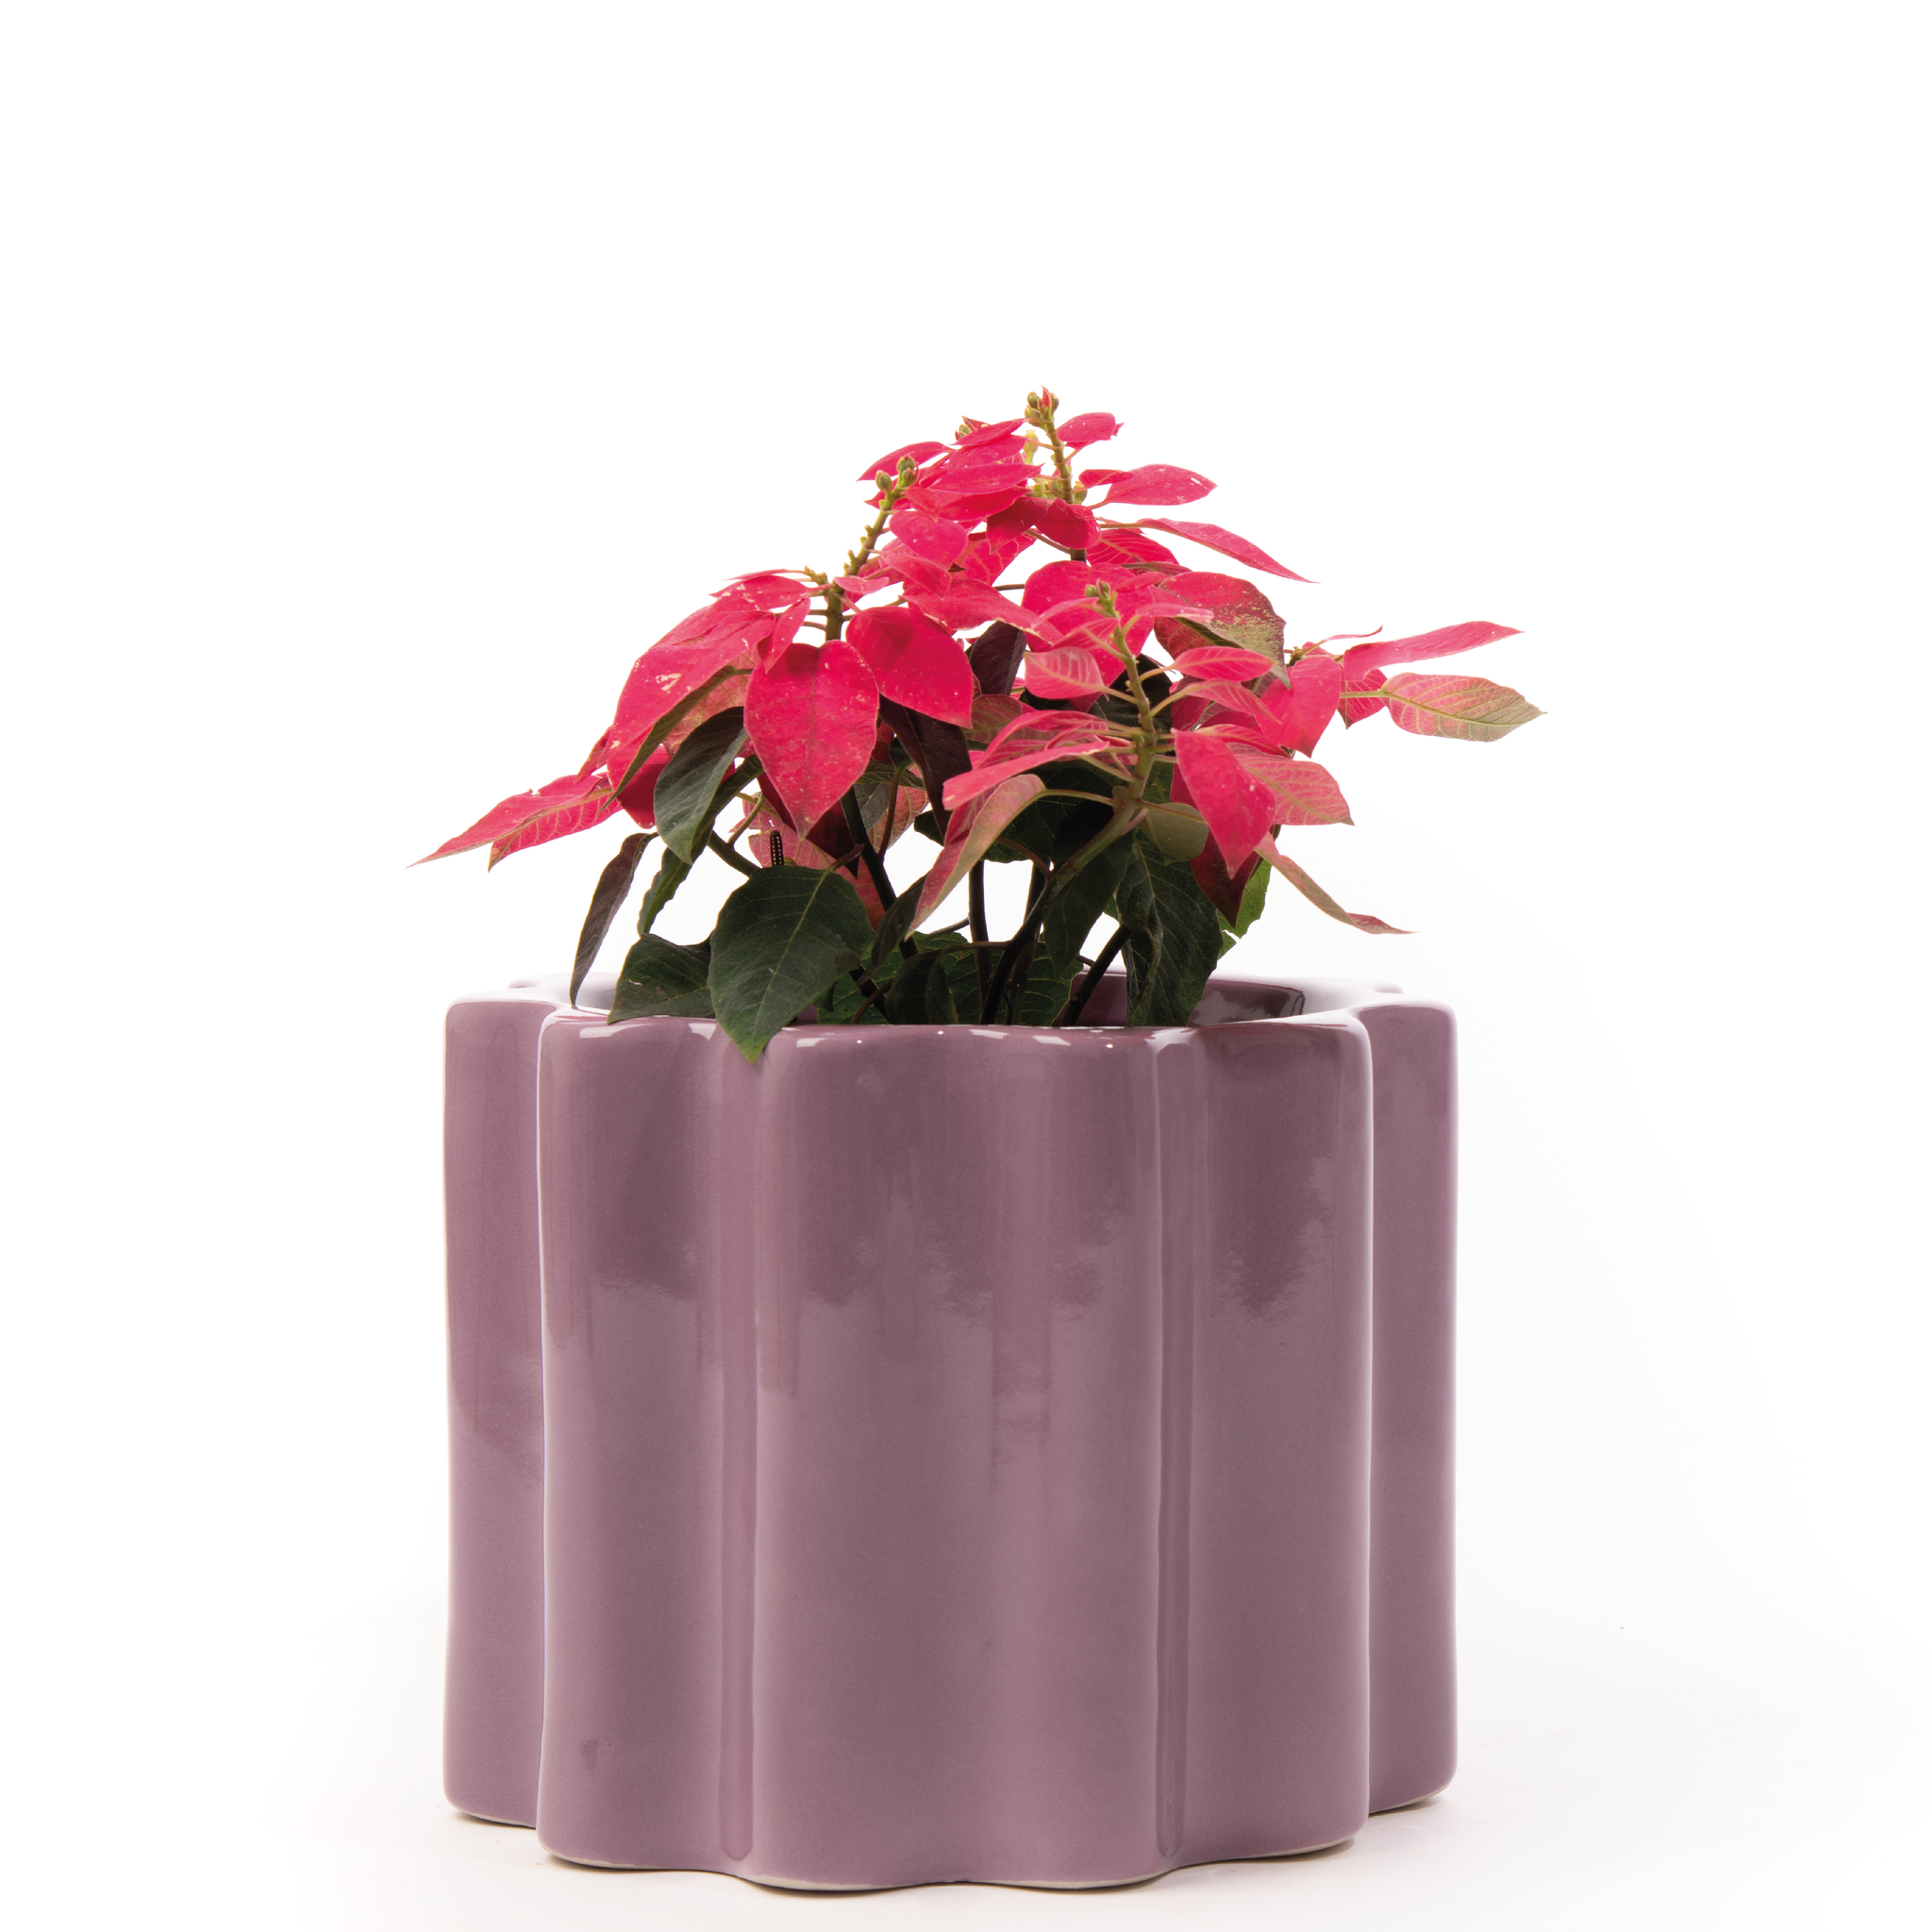 Small size Balmy Waves Ceramic Planter in Blackberry with Poinsettia Plant.